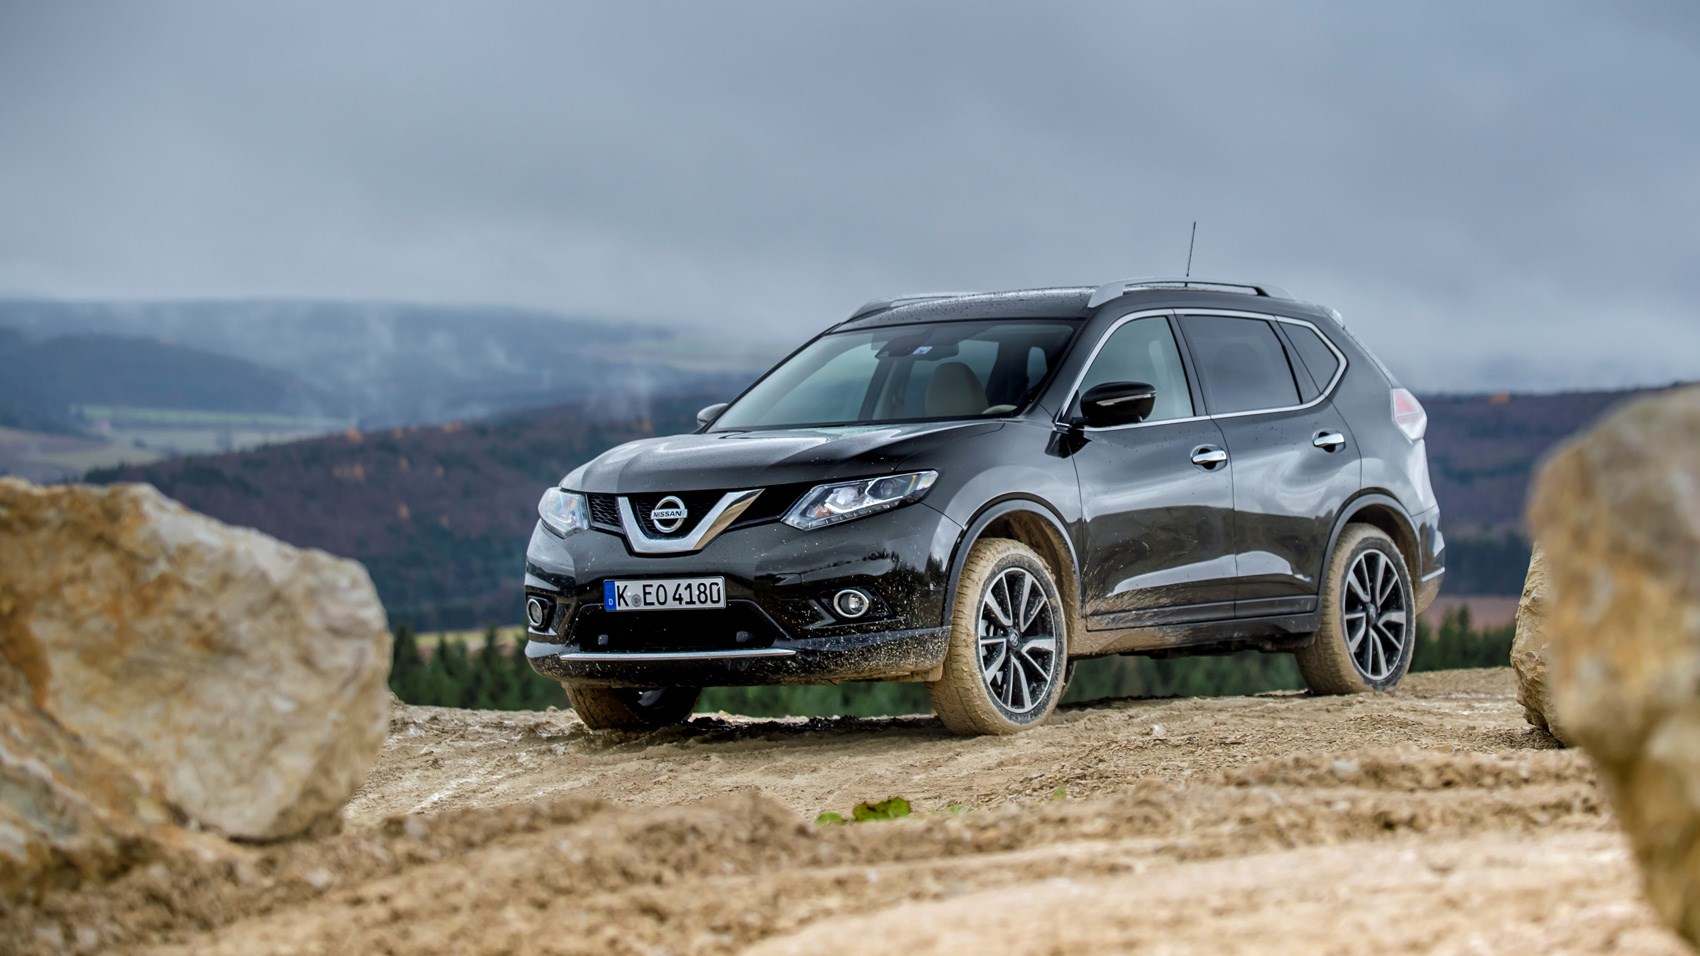 Nissan XTRAIL 2014  2017 used car review  Car review  RAC Drive